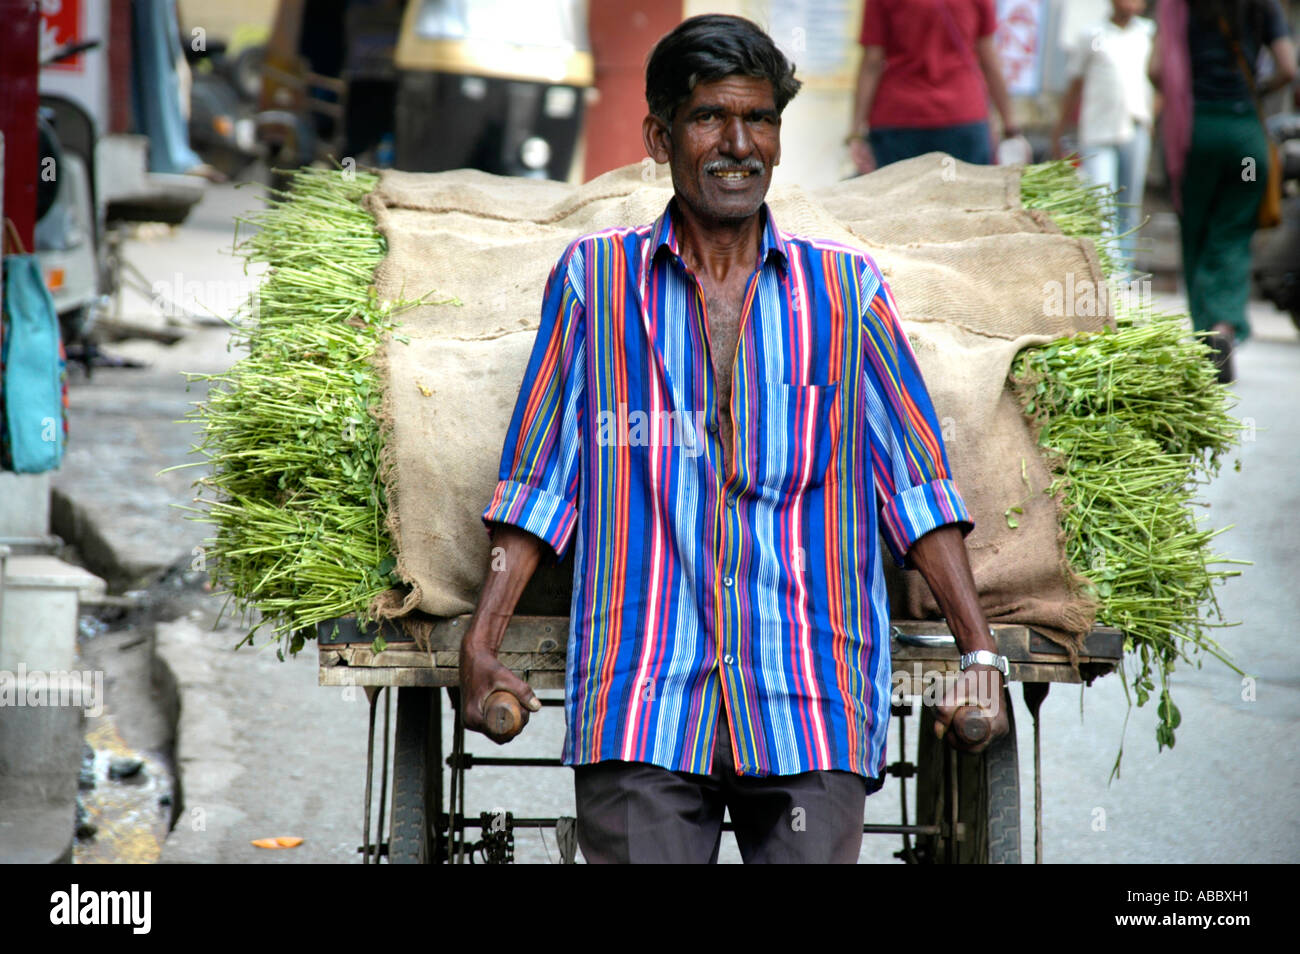 Indian man with a colourful shirt pushes a barrow filled with gras Udaipur Rajasthan India Stock Photo